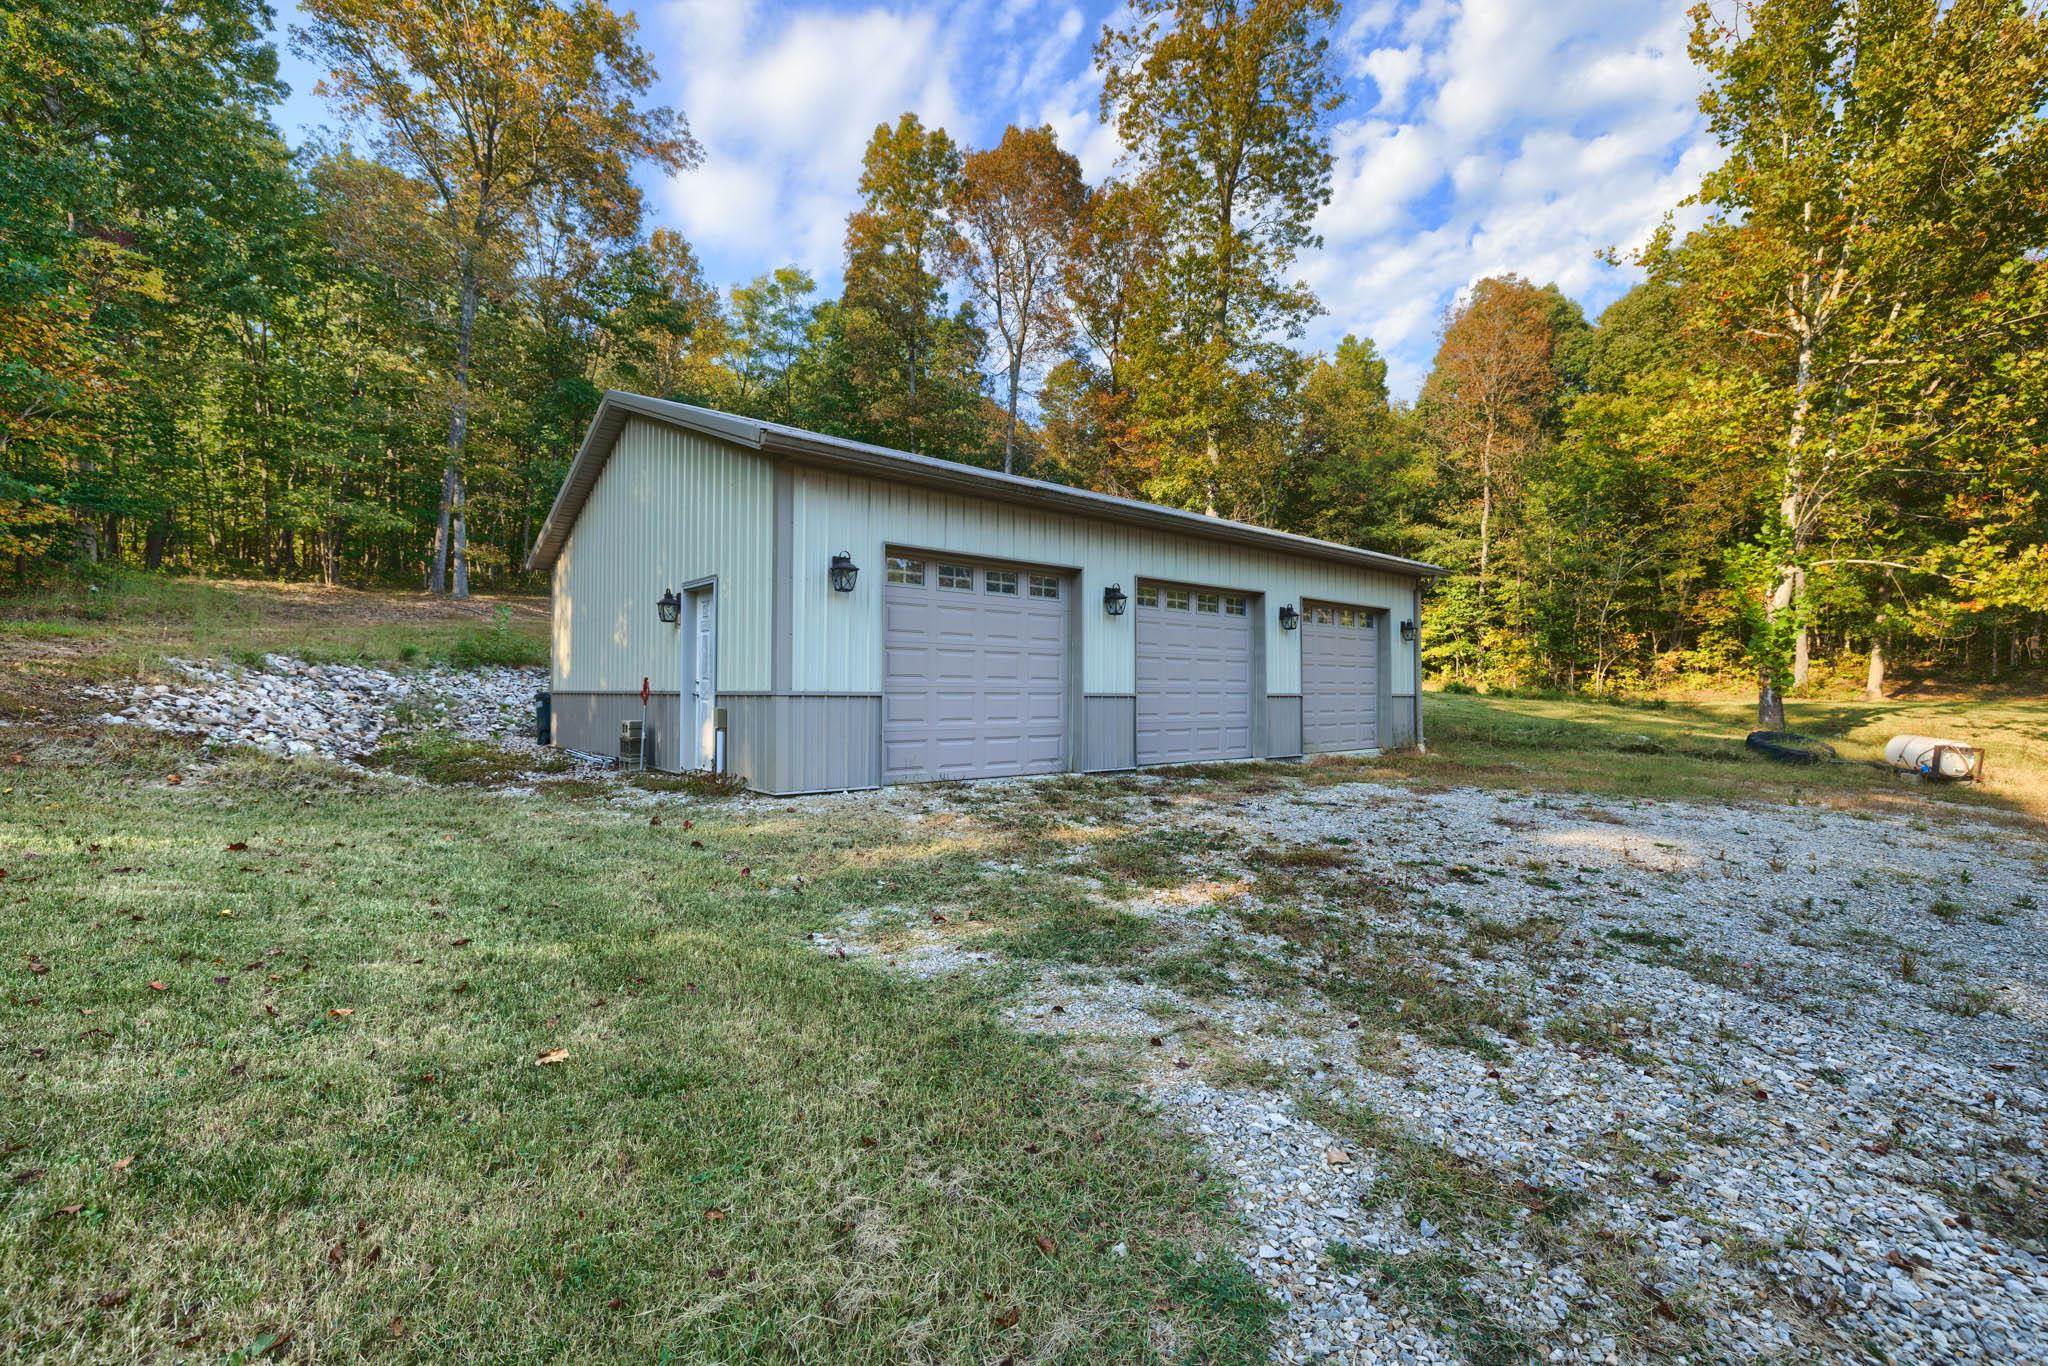 7125 US HWY 60 E, Hawesville, Kentucky 42348, 2 Bedrooms Bedrooms, ,1 BathroomBathrooms,Farm,For Sale,US HWY 60 E,88102